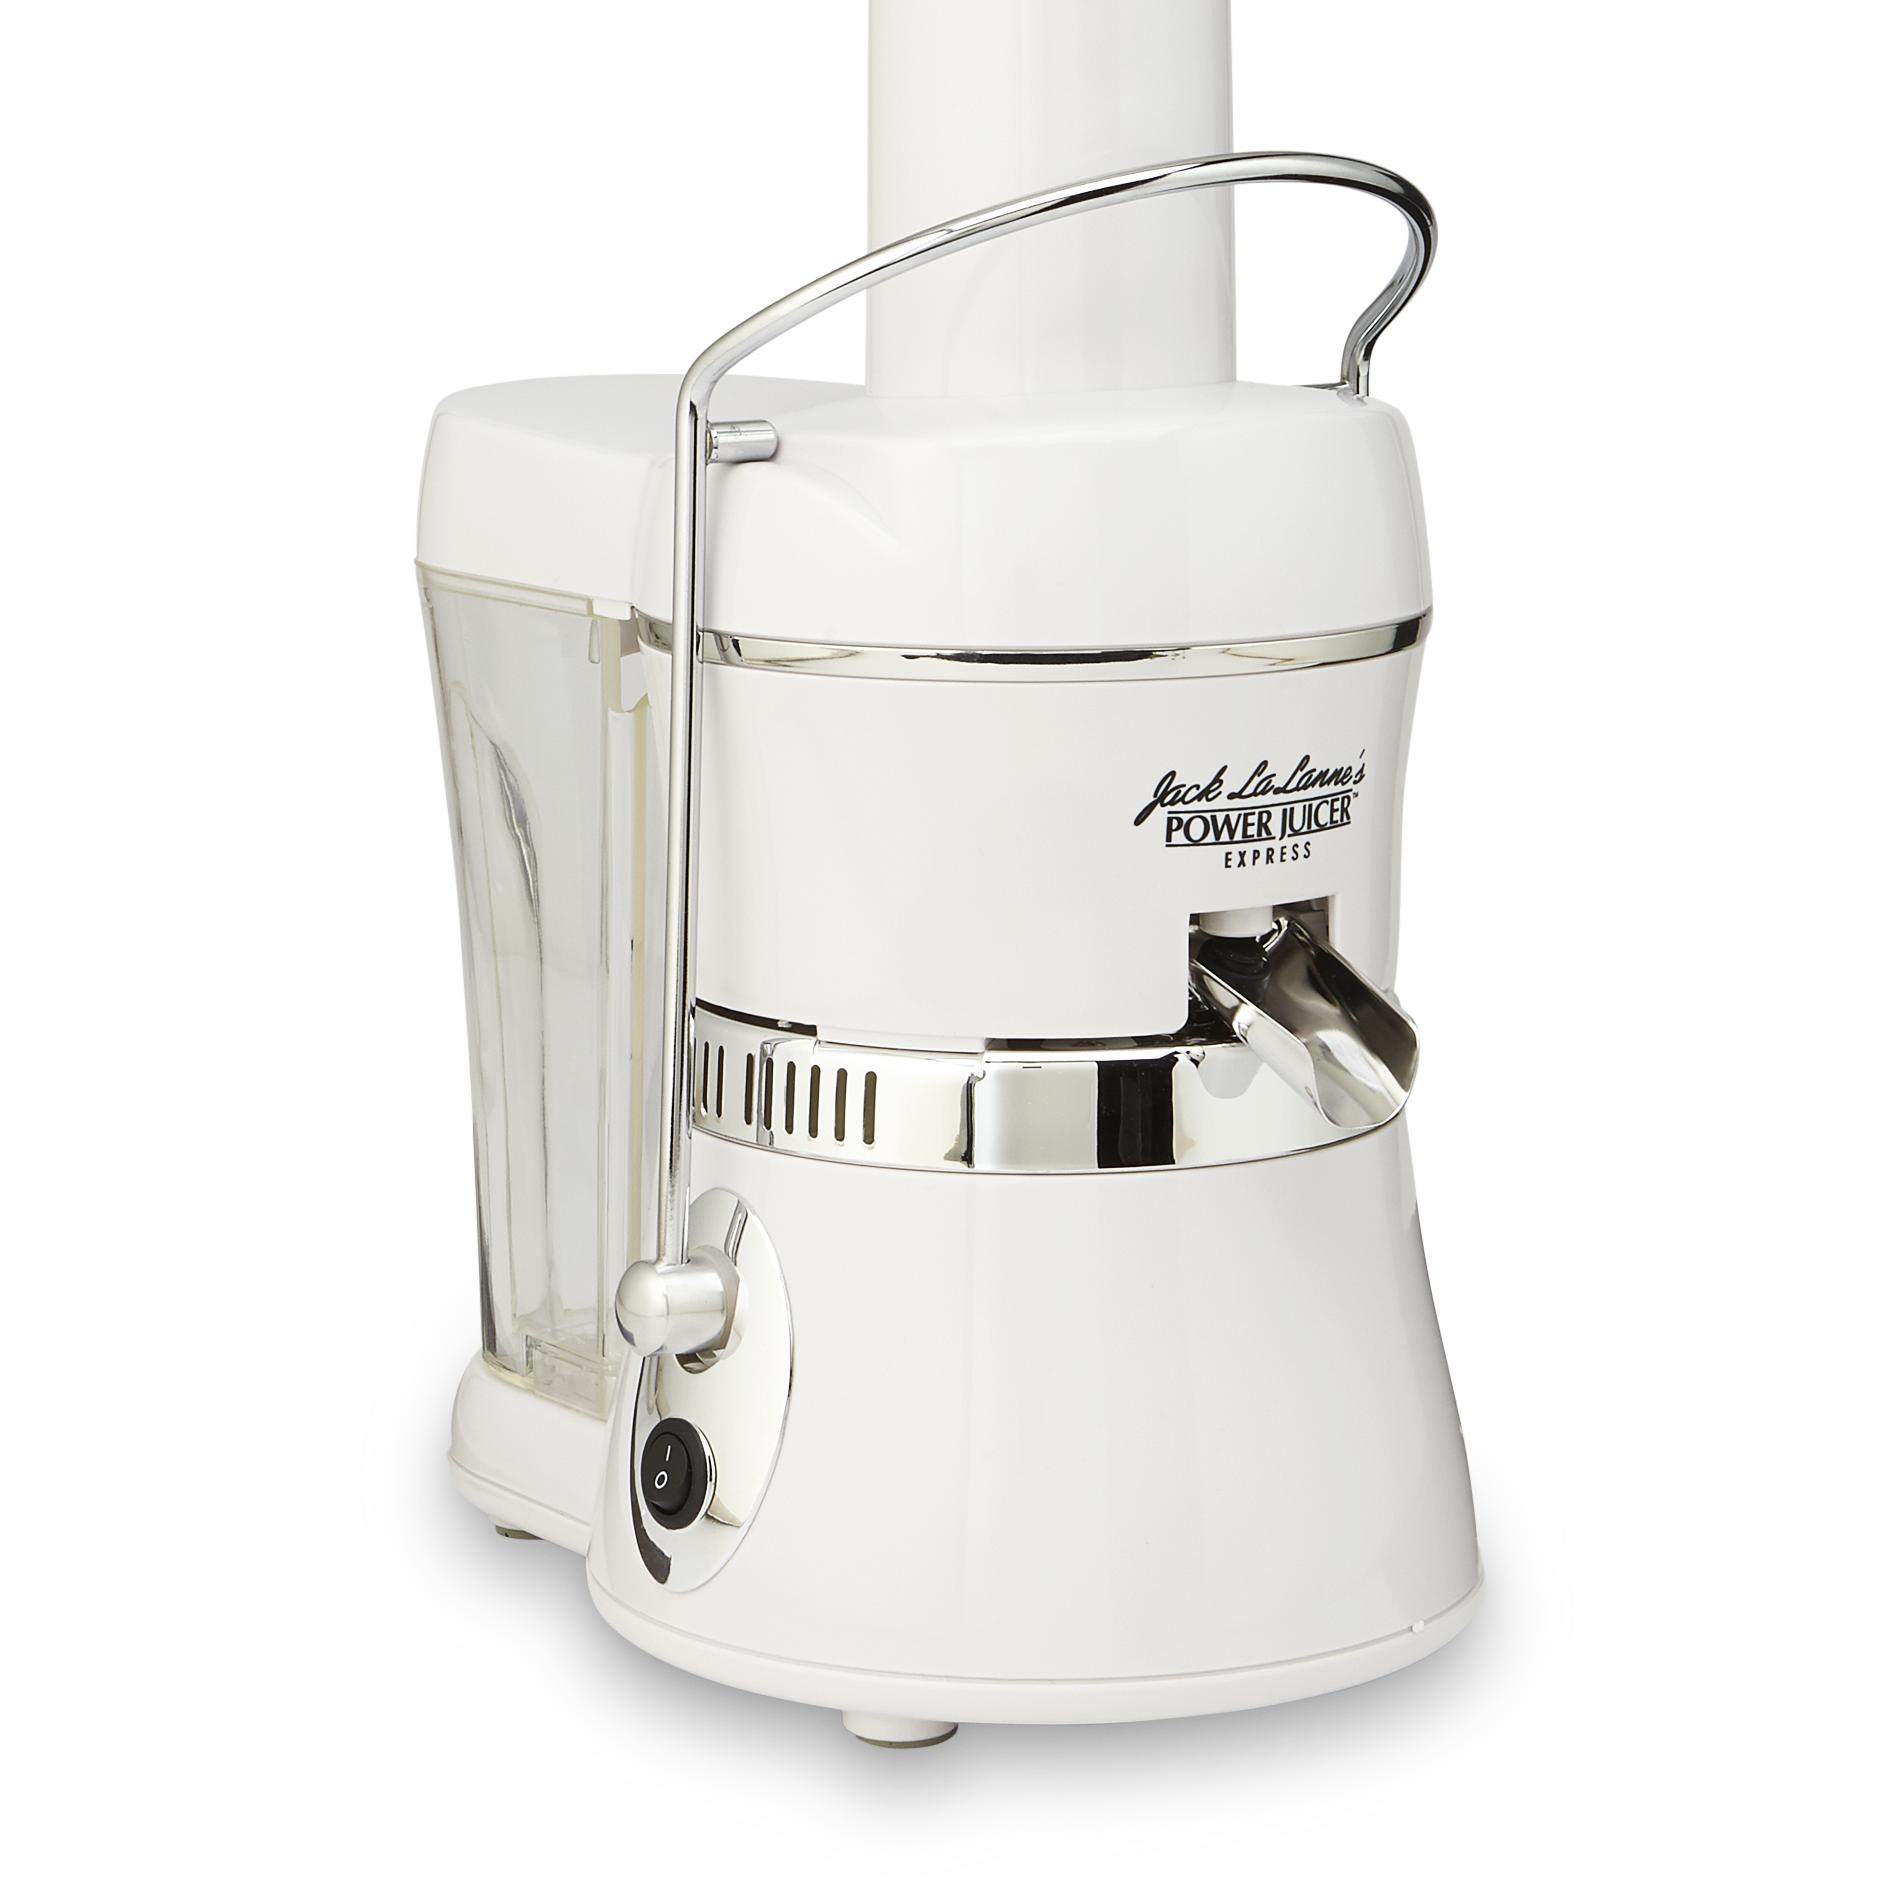 How To Clean Jack Lalanne Juicer Without Crescent Tool